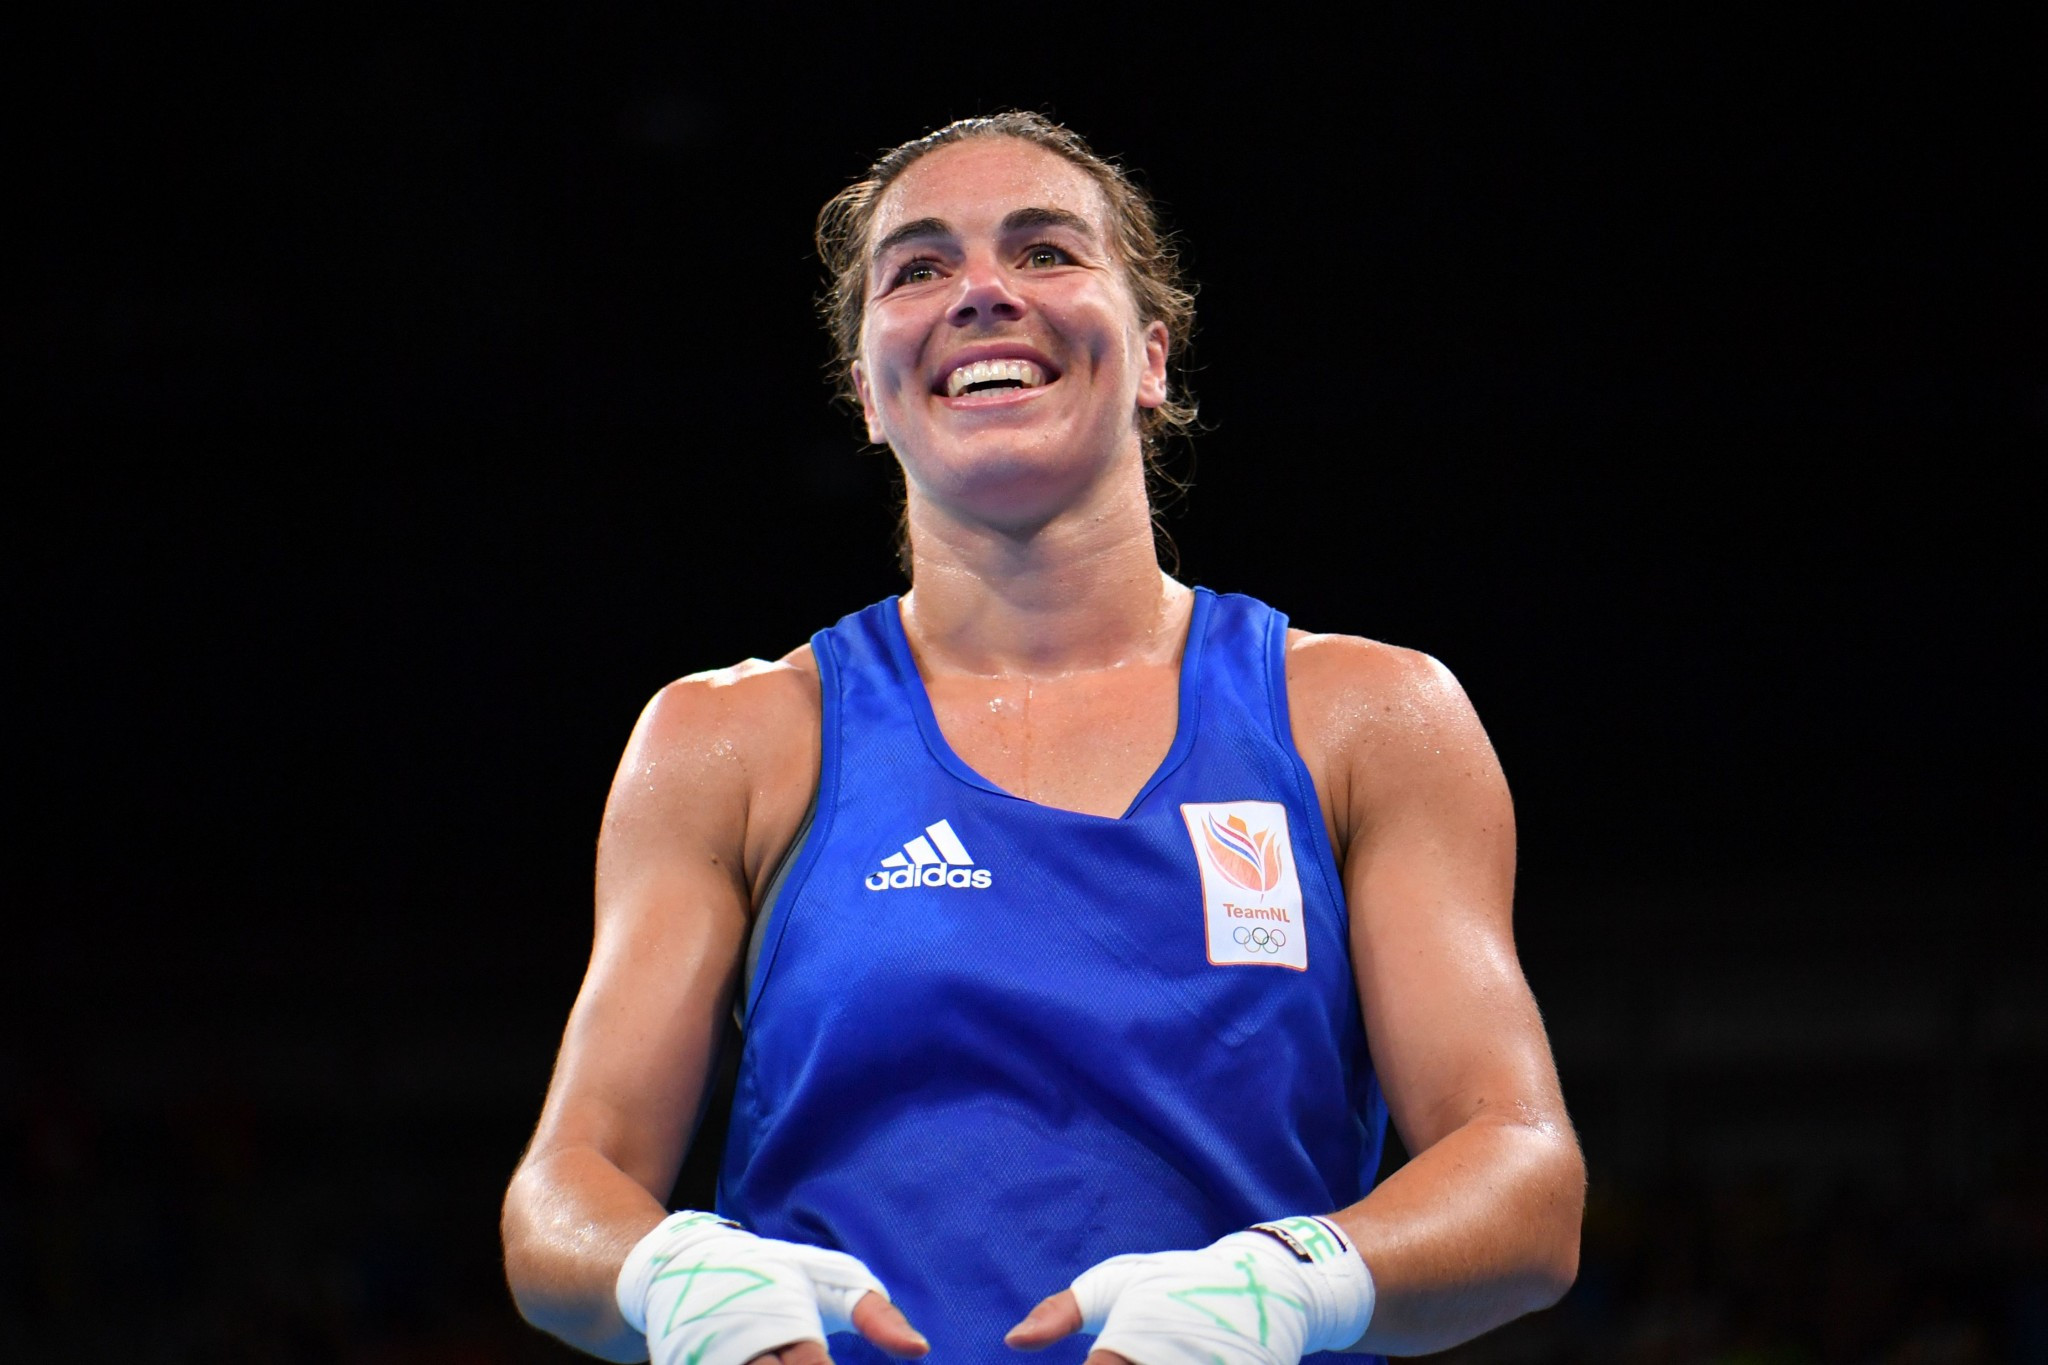 Nouchka Fontijn is in the final of the 75kg category ©Getty Images